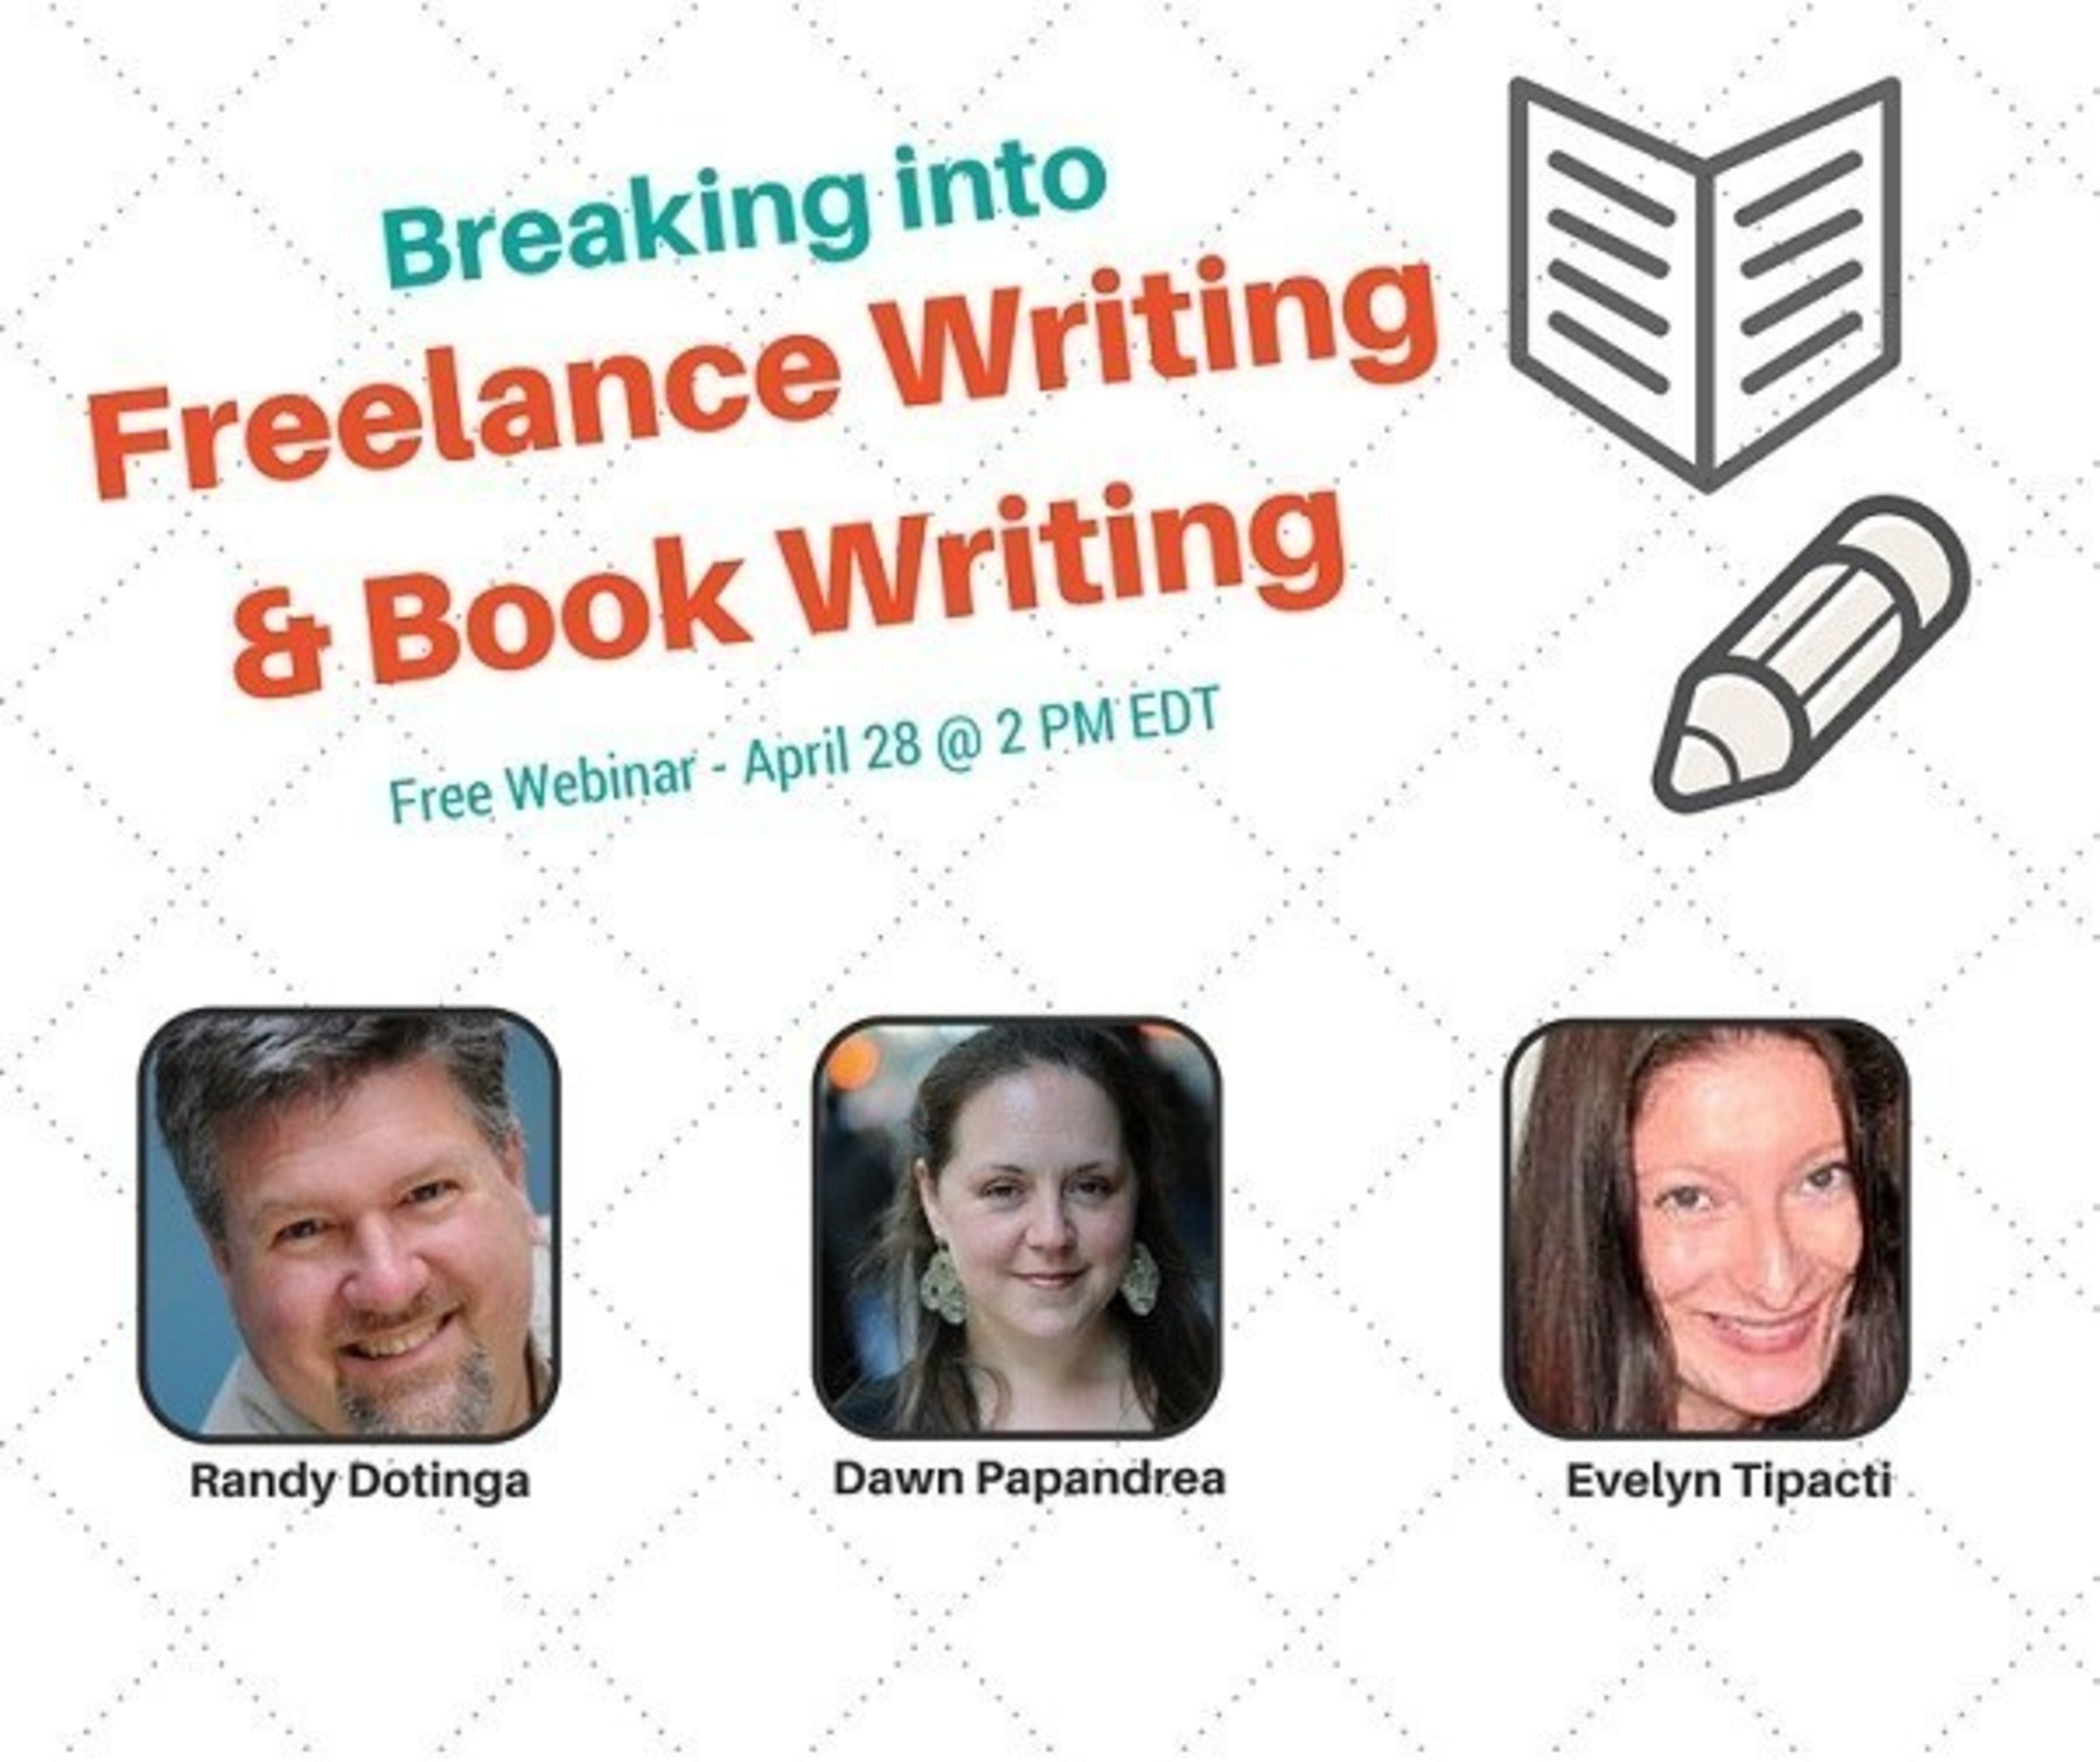 ProfNet is hosting a free webinar Tuesday, April 28, from 2 to 3 p.m. EDT, on how to break into freelancing and book writing. Registration: https://cc.readytalk.com/r/cntqpjtbbc1c&eom